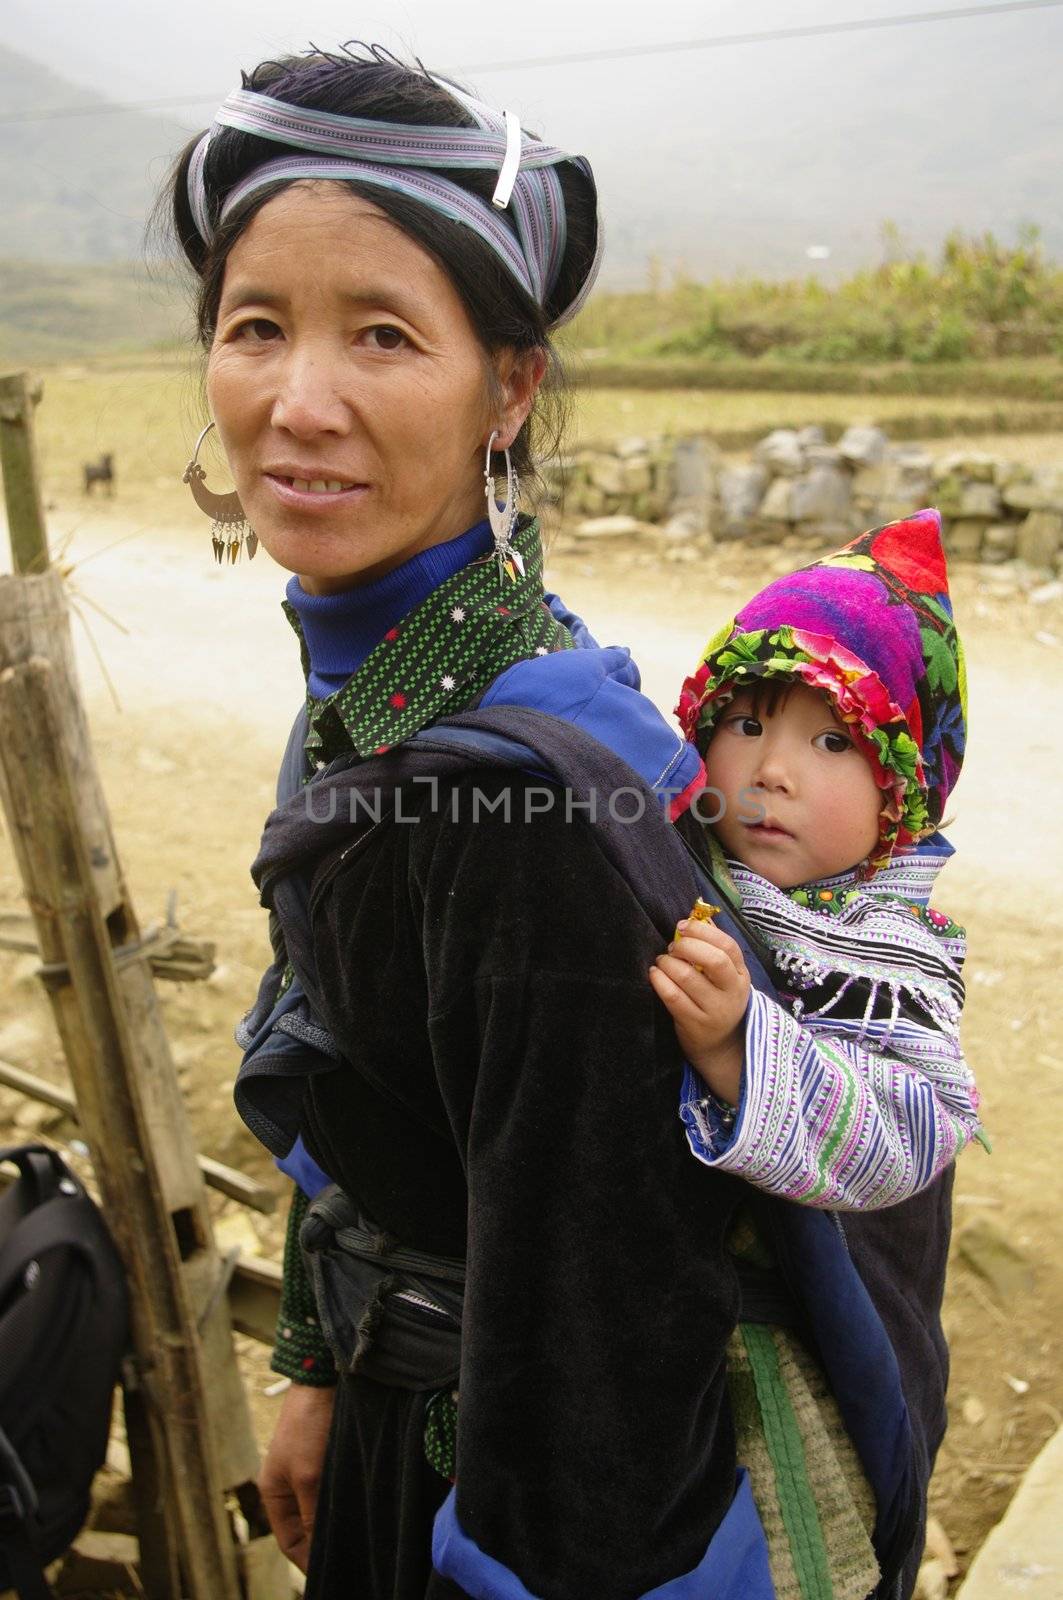 The Hmong live in small community of some houses. Hmong women have the best clothes of all minorities in Vietnam in general. Their traditional dress is two colors. Blue and black is essential. They have this particular hairstyle that ties their hair with a large blue ribbon. The silver earrings are a must.